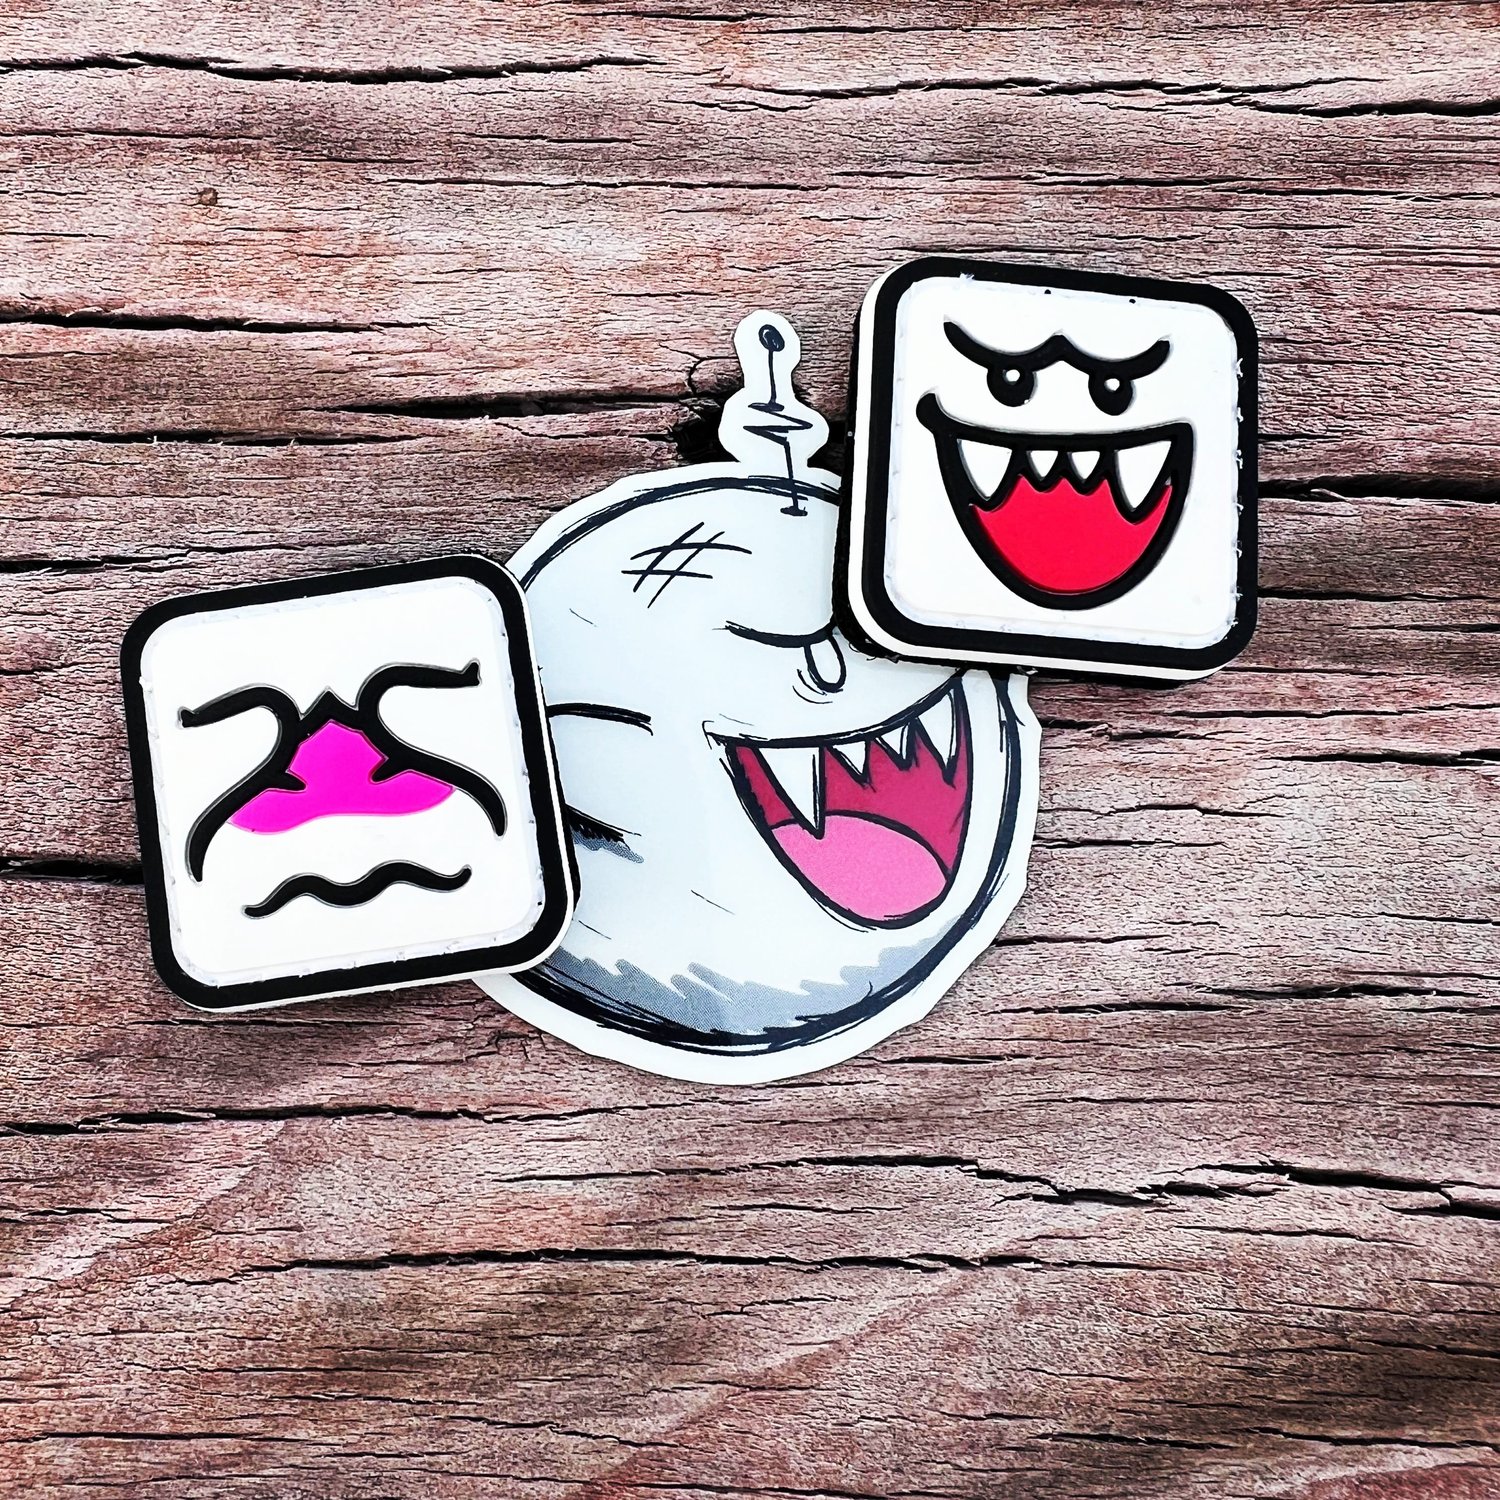 Boo Face Patch set/sticker combo